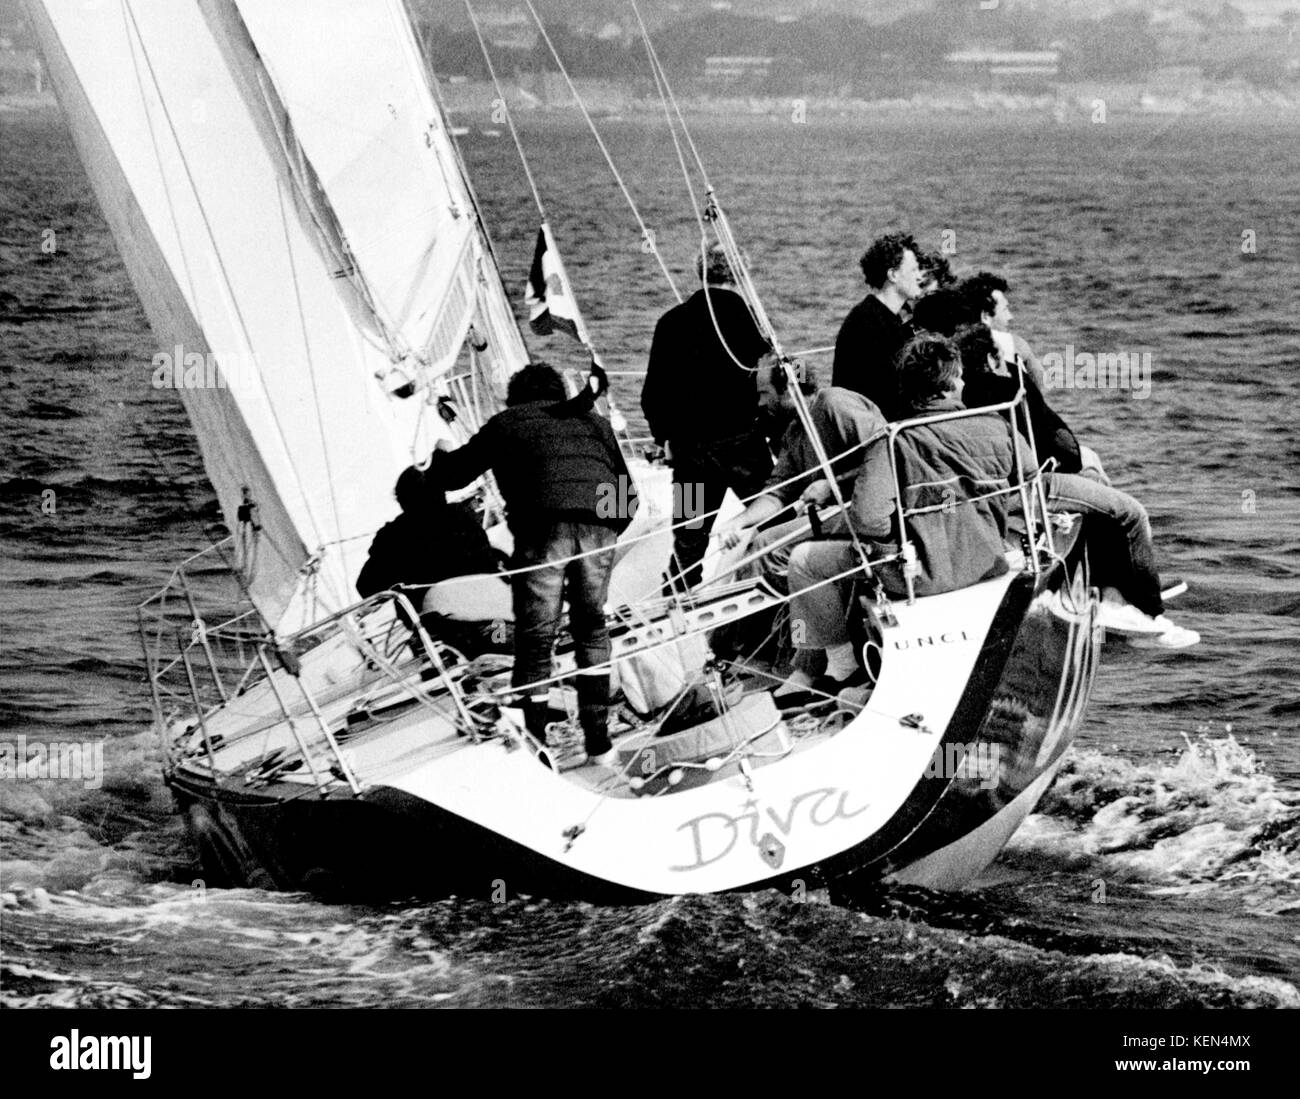 AJAXNETPHOTO. 10TH AUGUST,1983. PLYMOUTH, ENGLAND. - FASTNET RACE - FRENCH ADMIRAL'S CUP TEAM YACHT DIVA HEADS FOR THE BREAKWATER LIGHT AS IT NEARS THE FINISH LINE.  PHOTO:JONATHAN EASTLAND/AJAX REF:FASTNET 83 2 Stock Photo